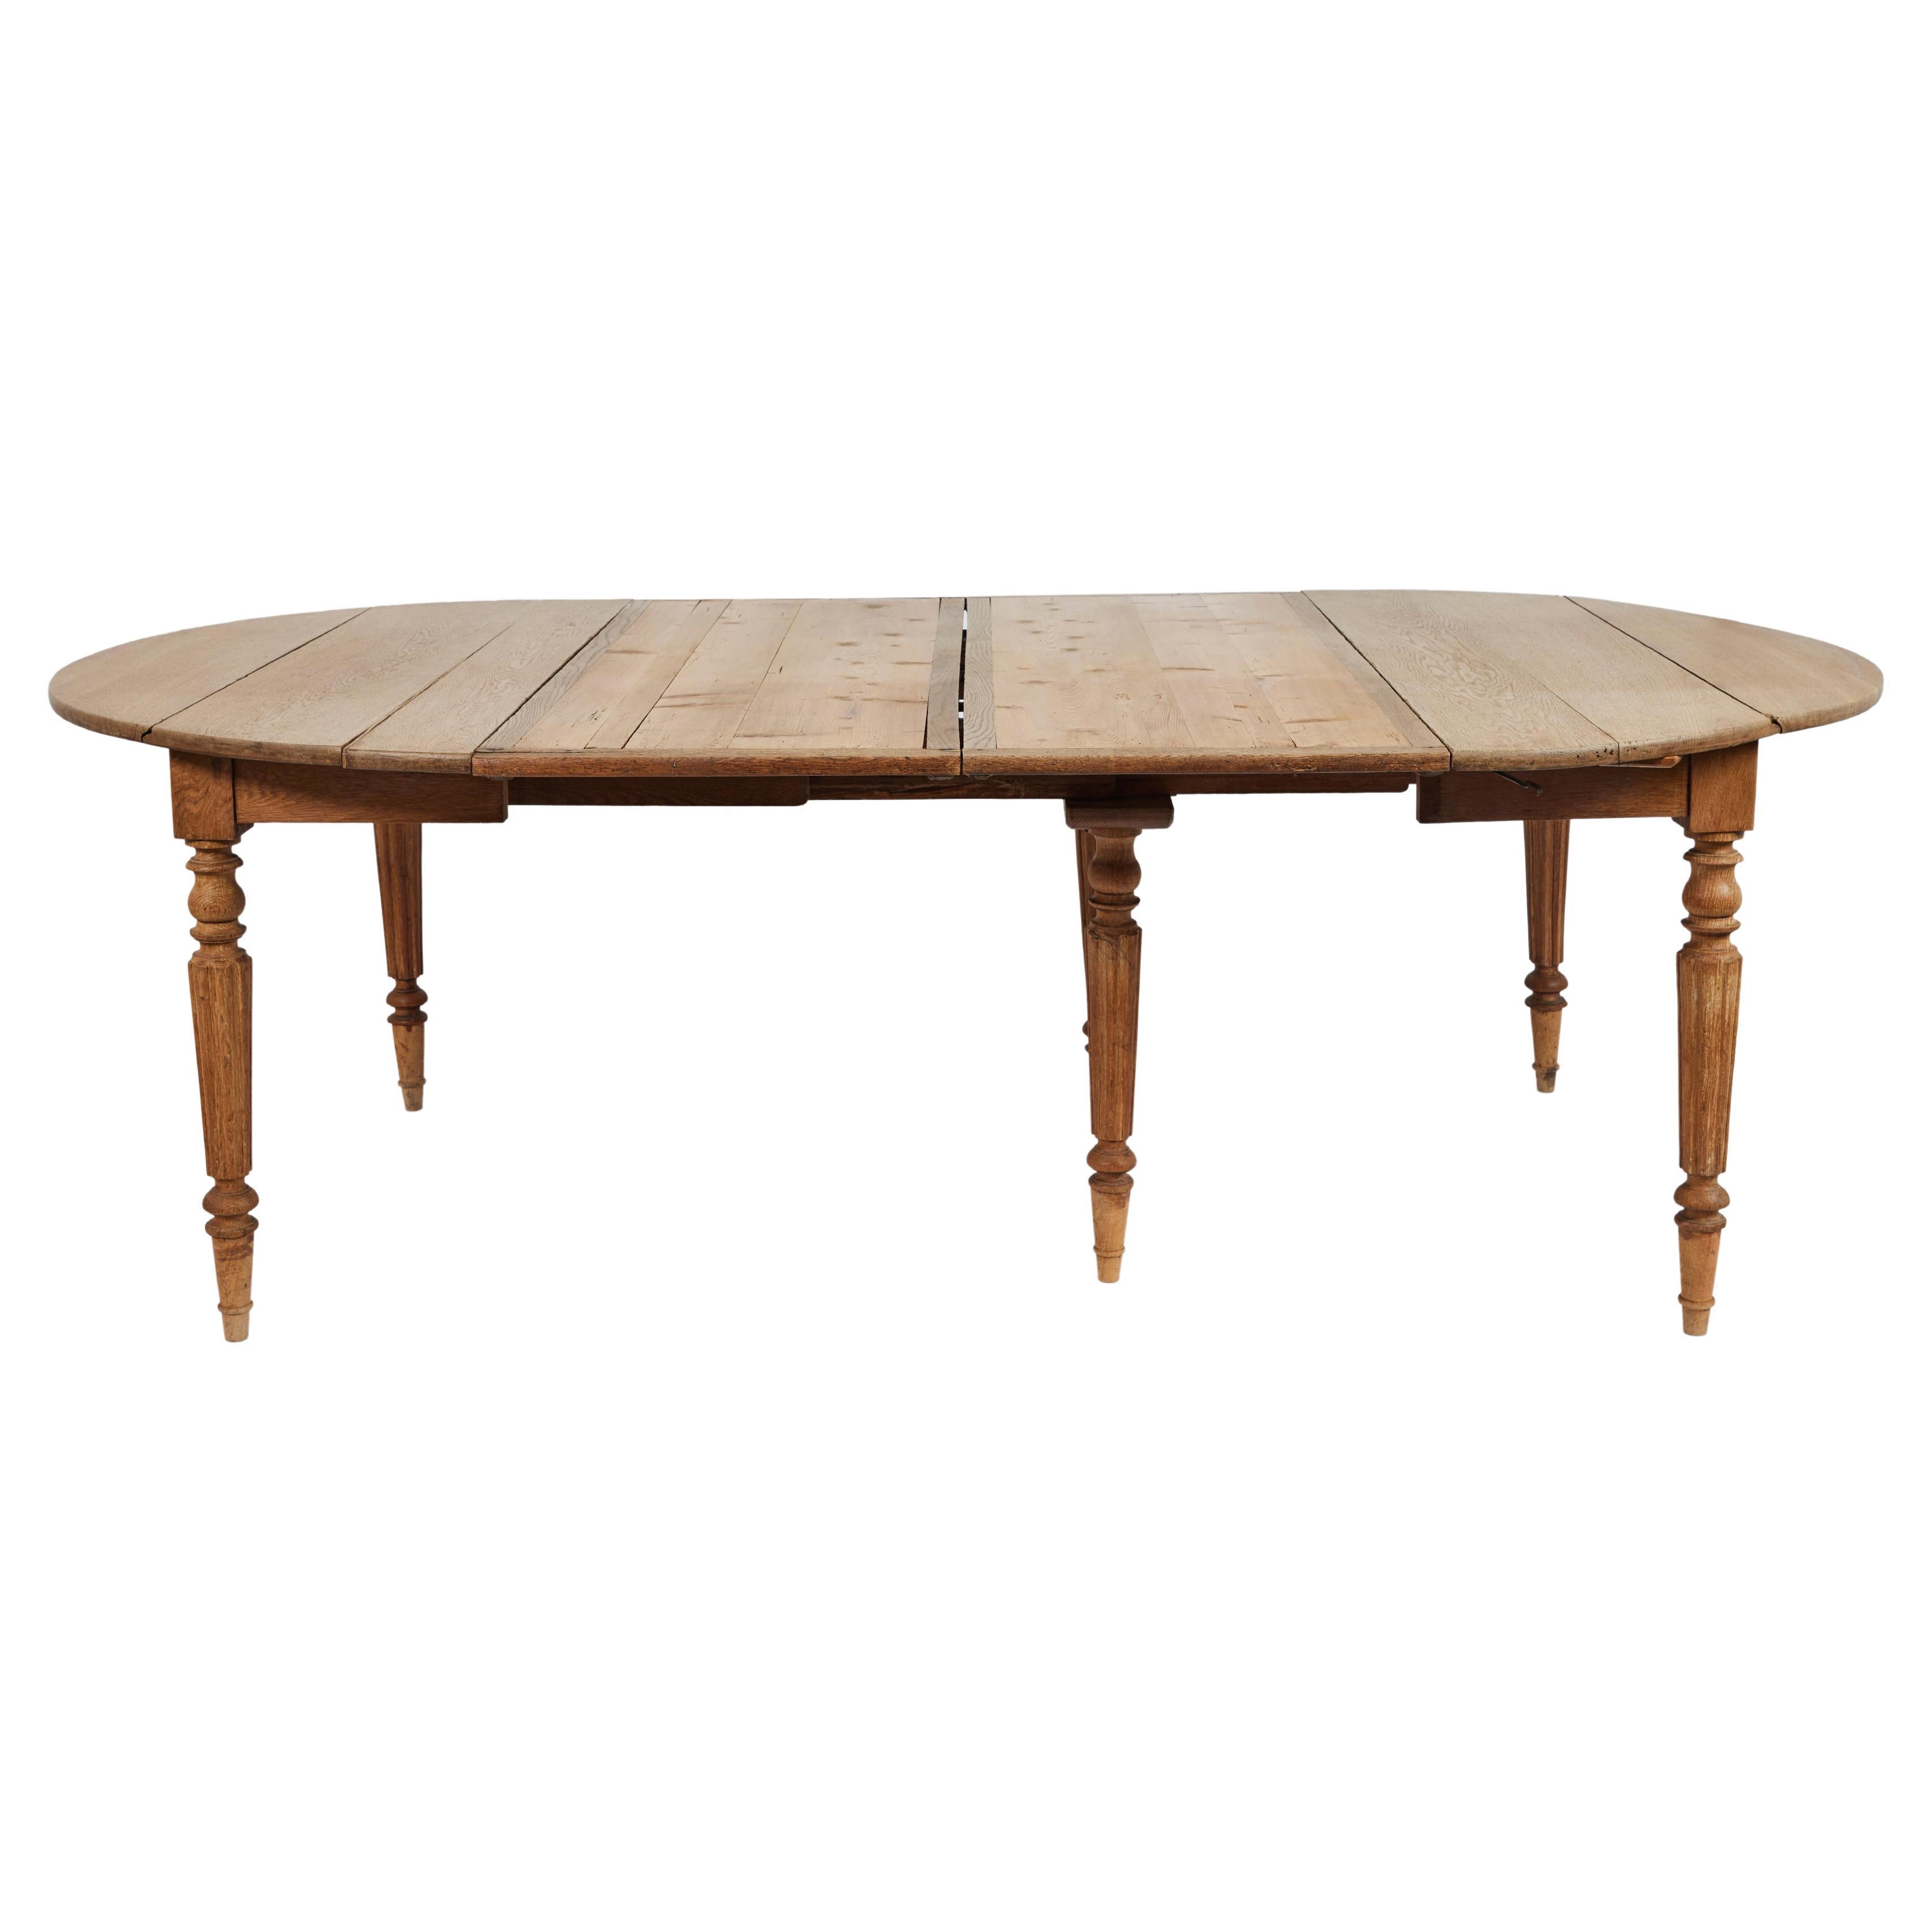 Georgian 19th C. English Oak Expandable Dining Table with Four Leaves